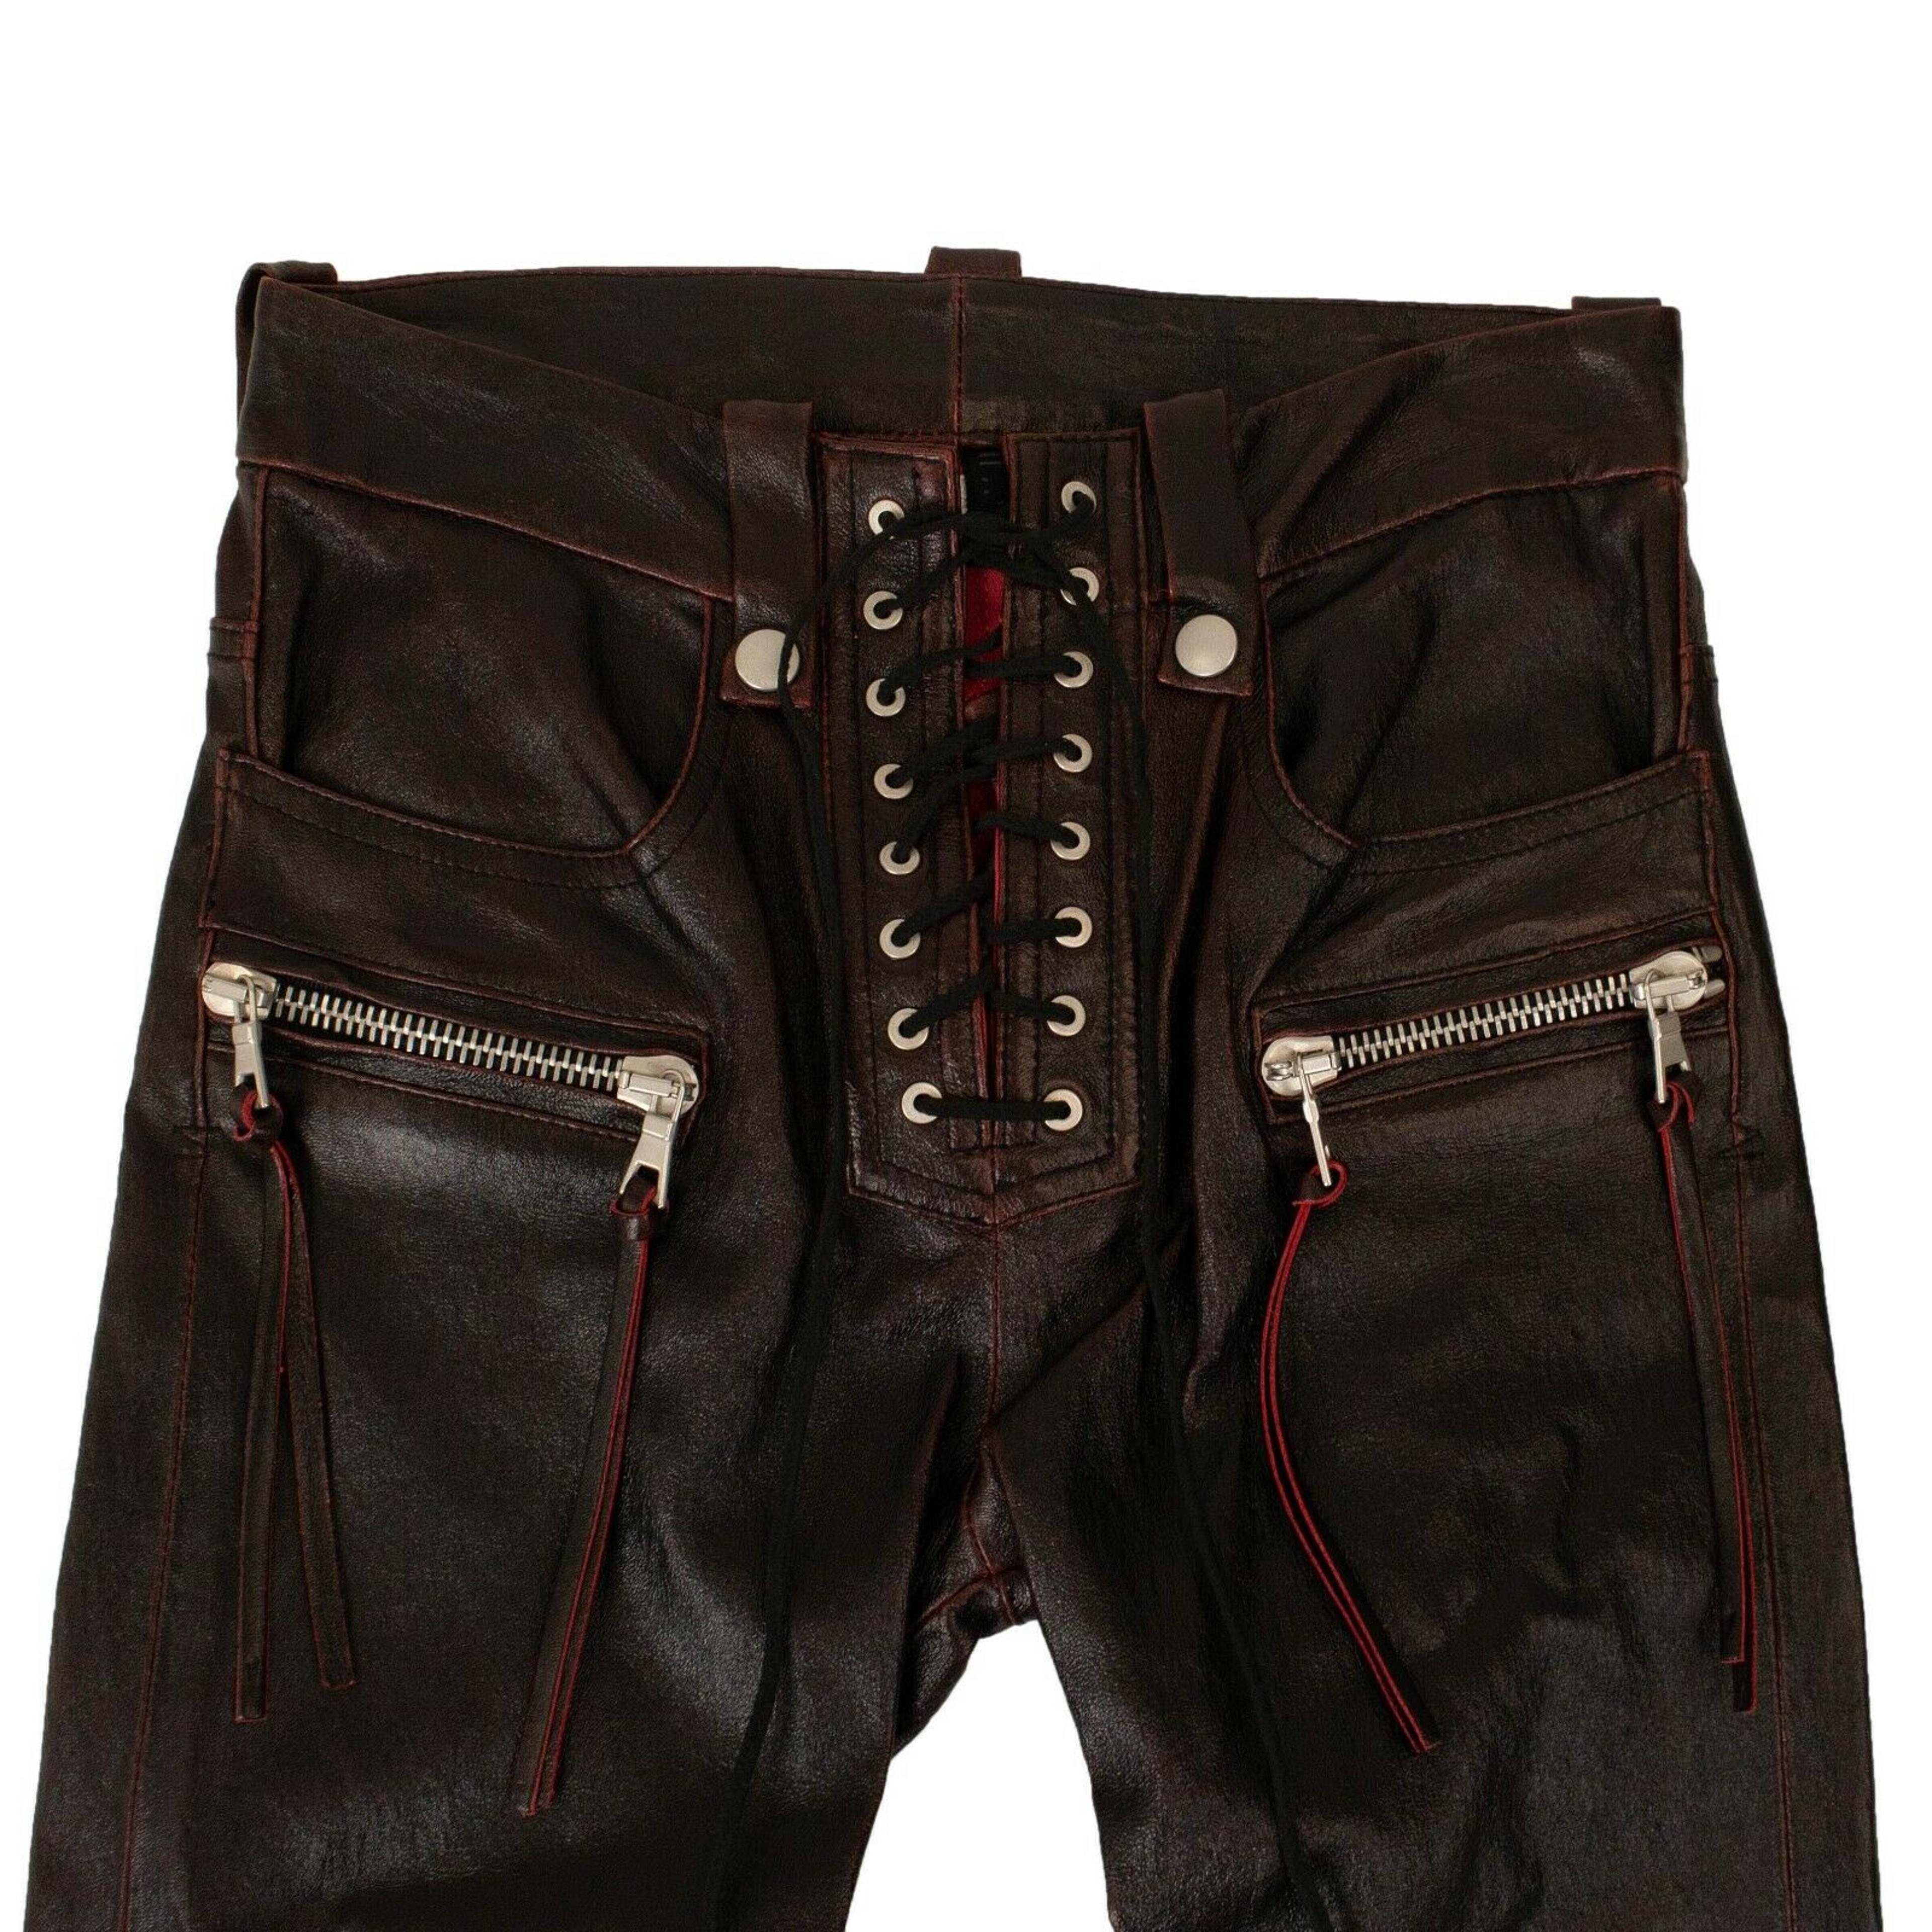 Alternate View 2 of Unravel Project Leather Lace Up Detail Pants - Black/Red